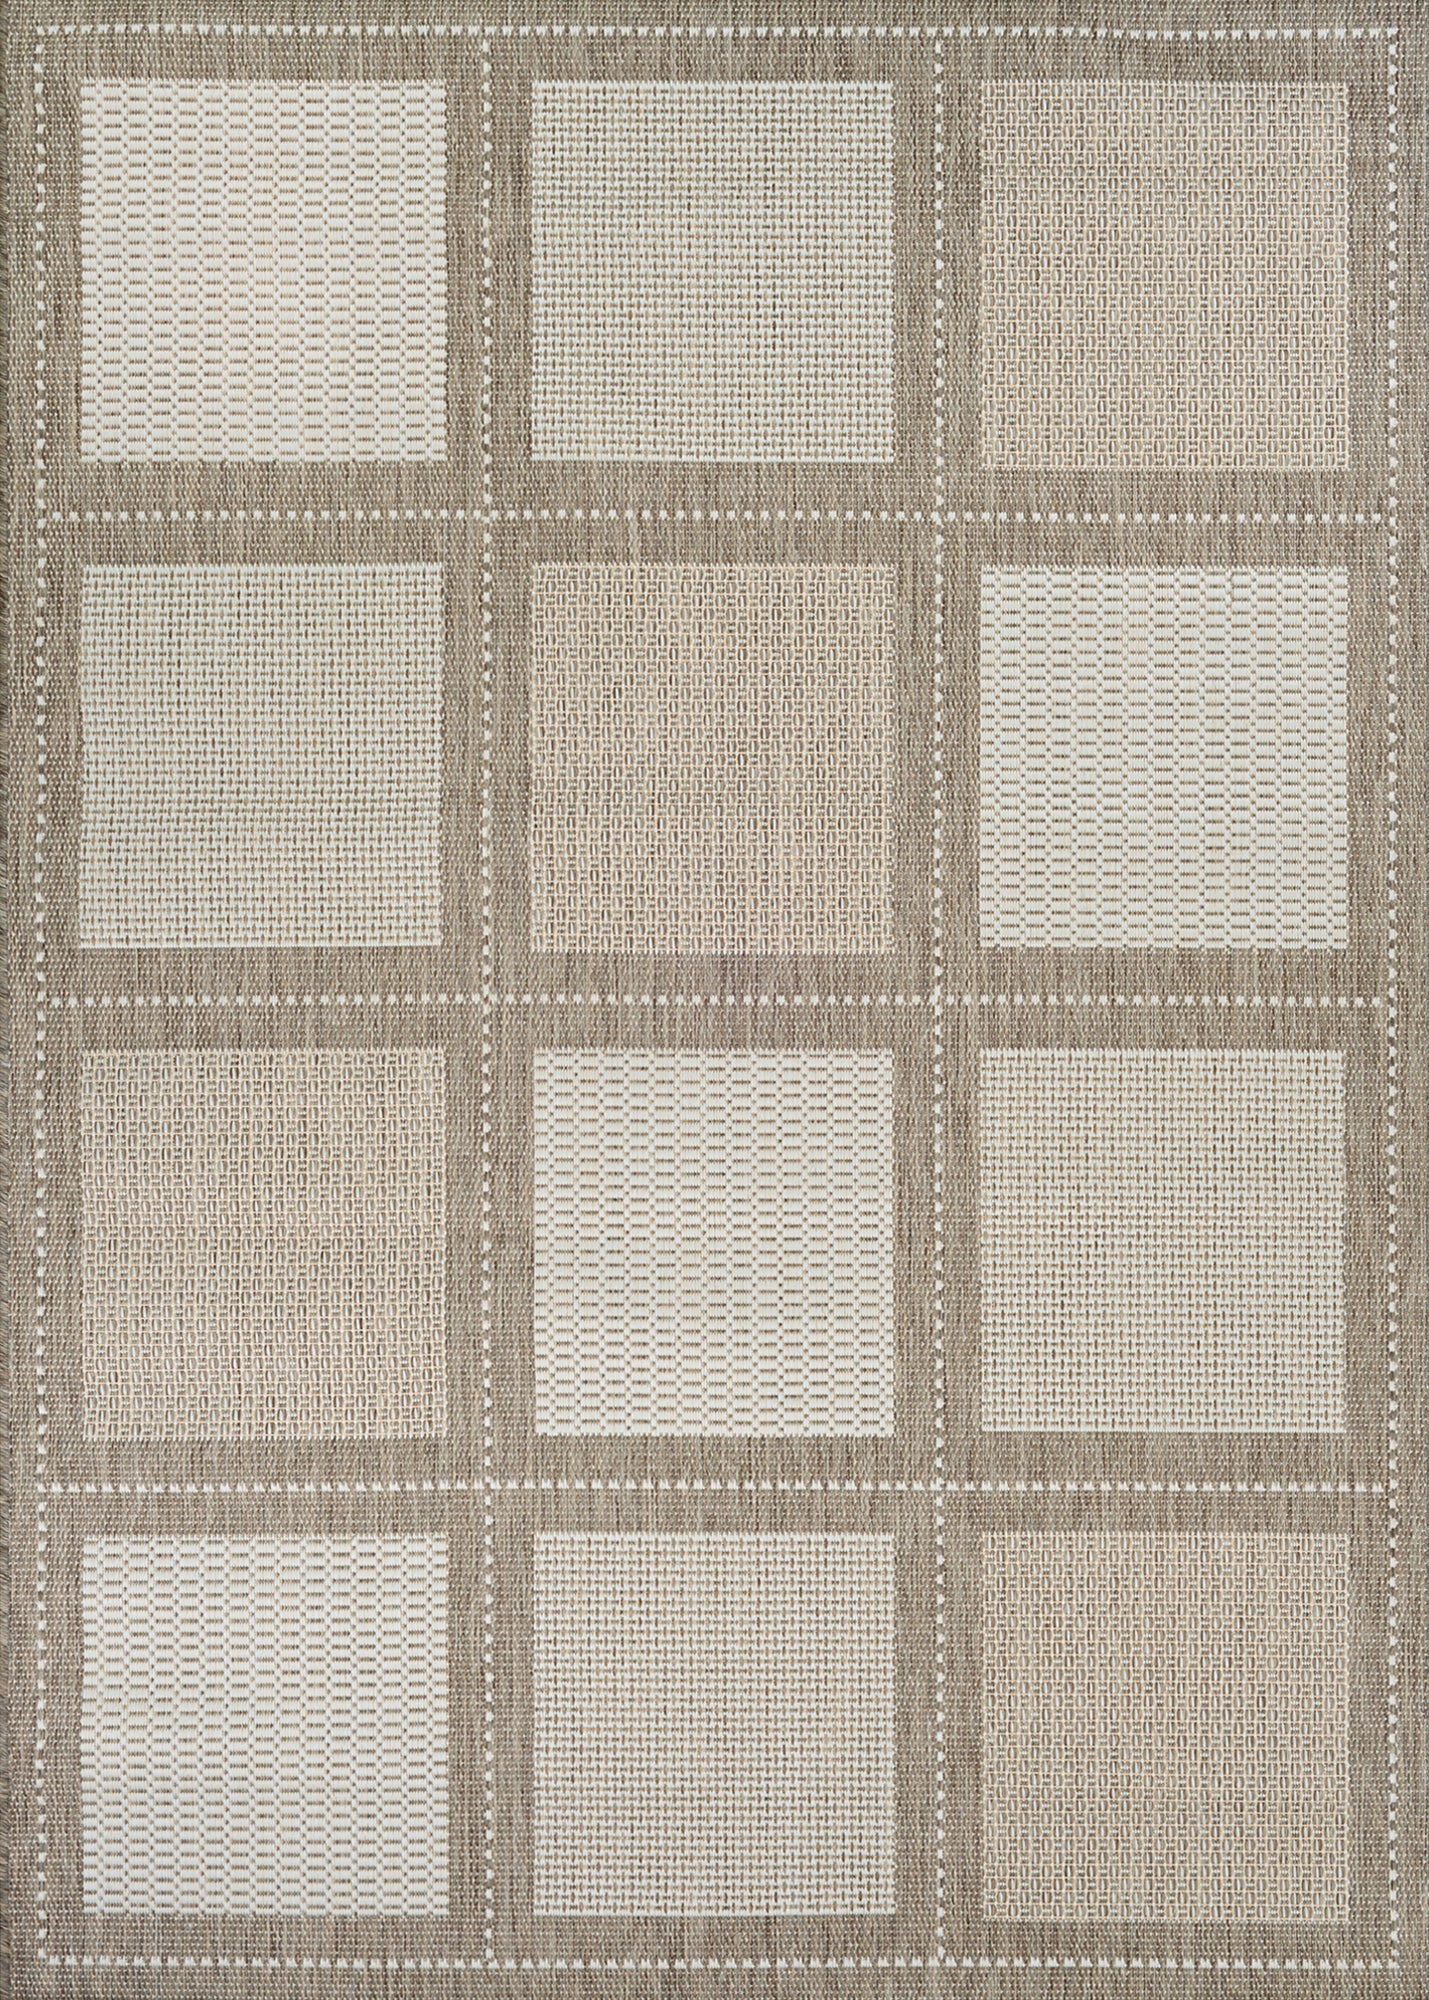 Couristan Recife Summit Champagne/Taupe Area Rug main image